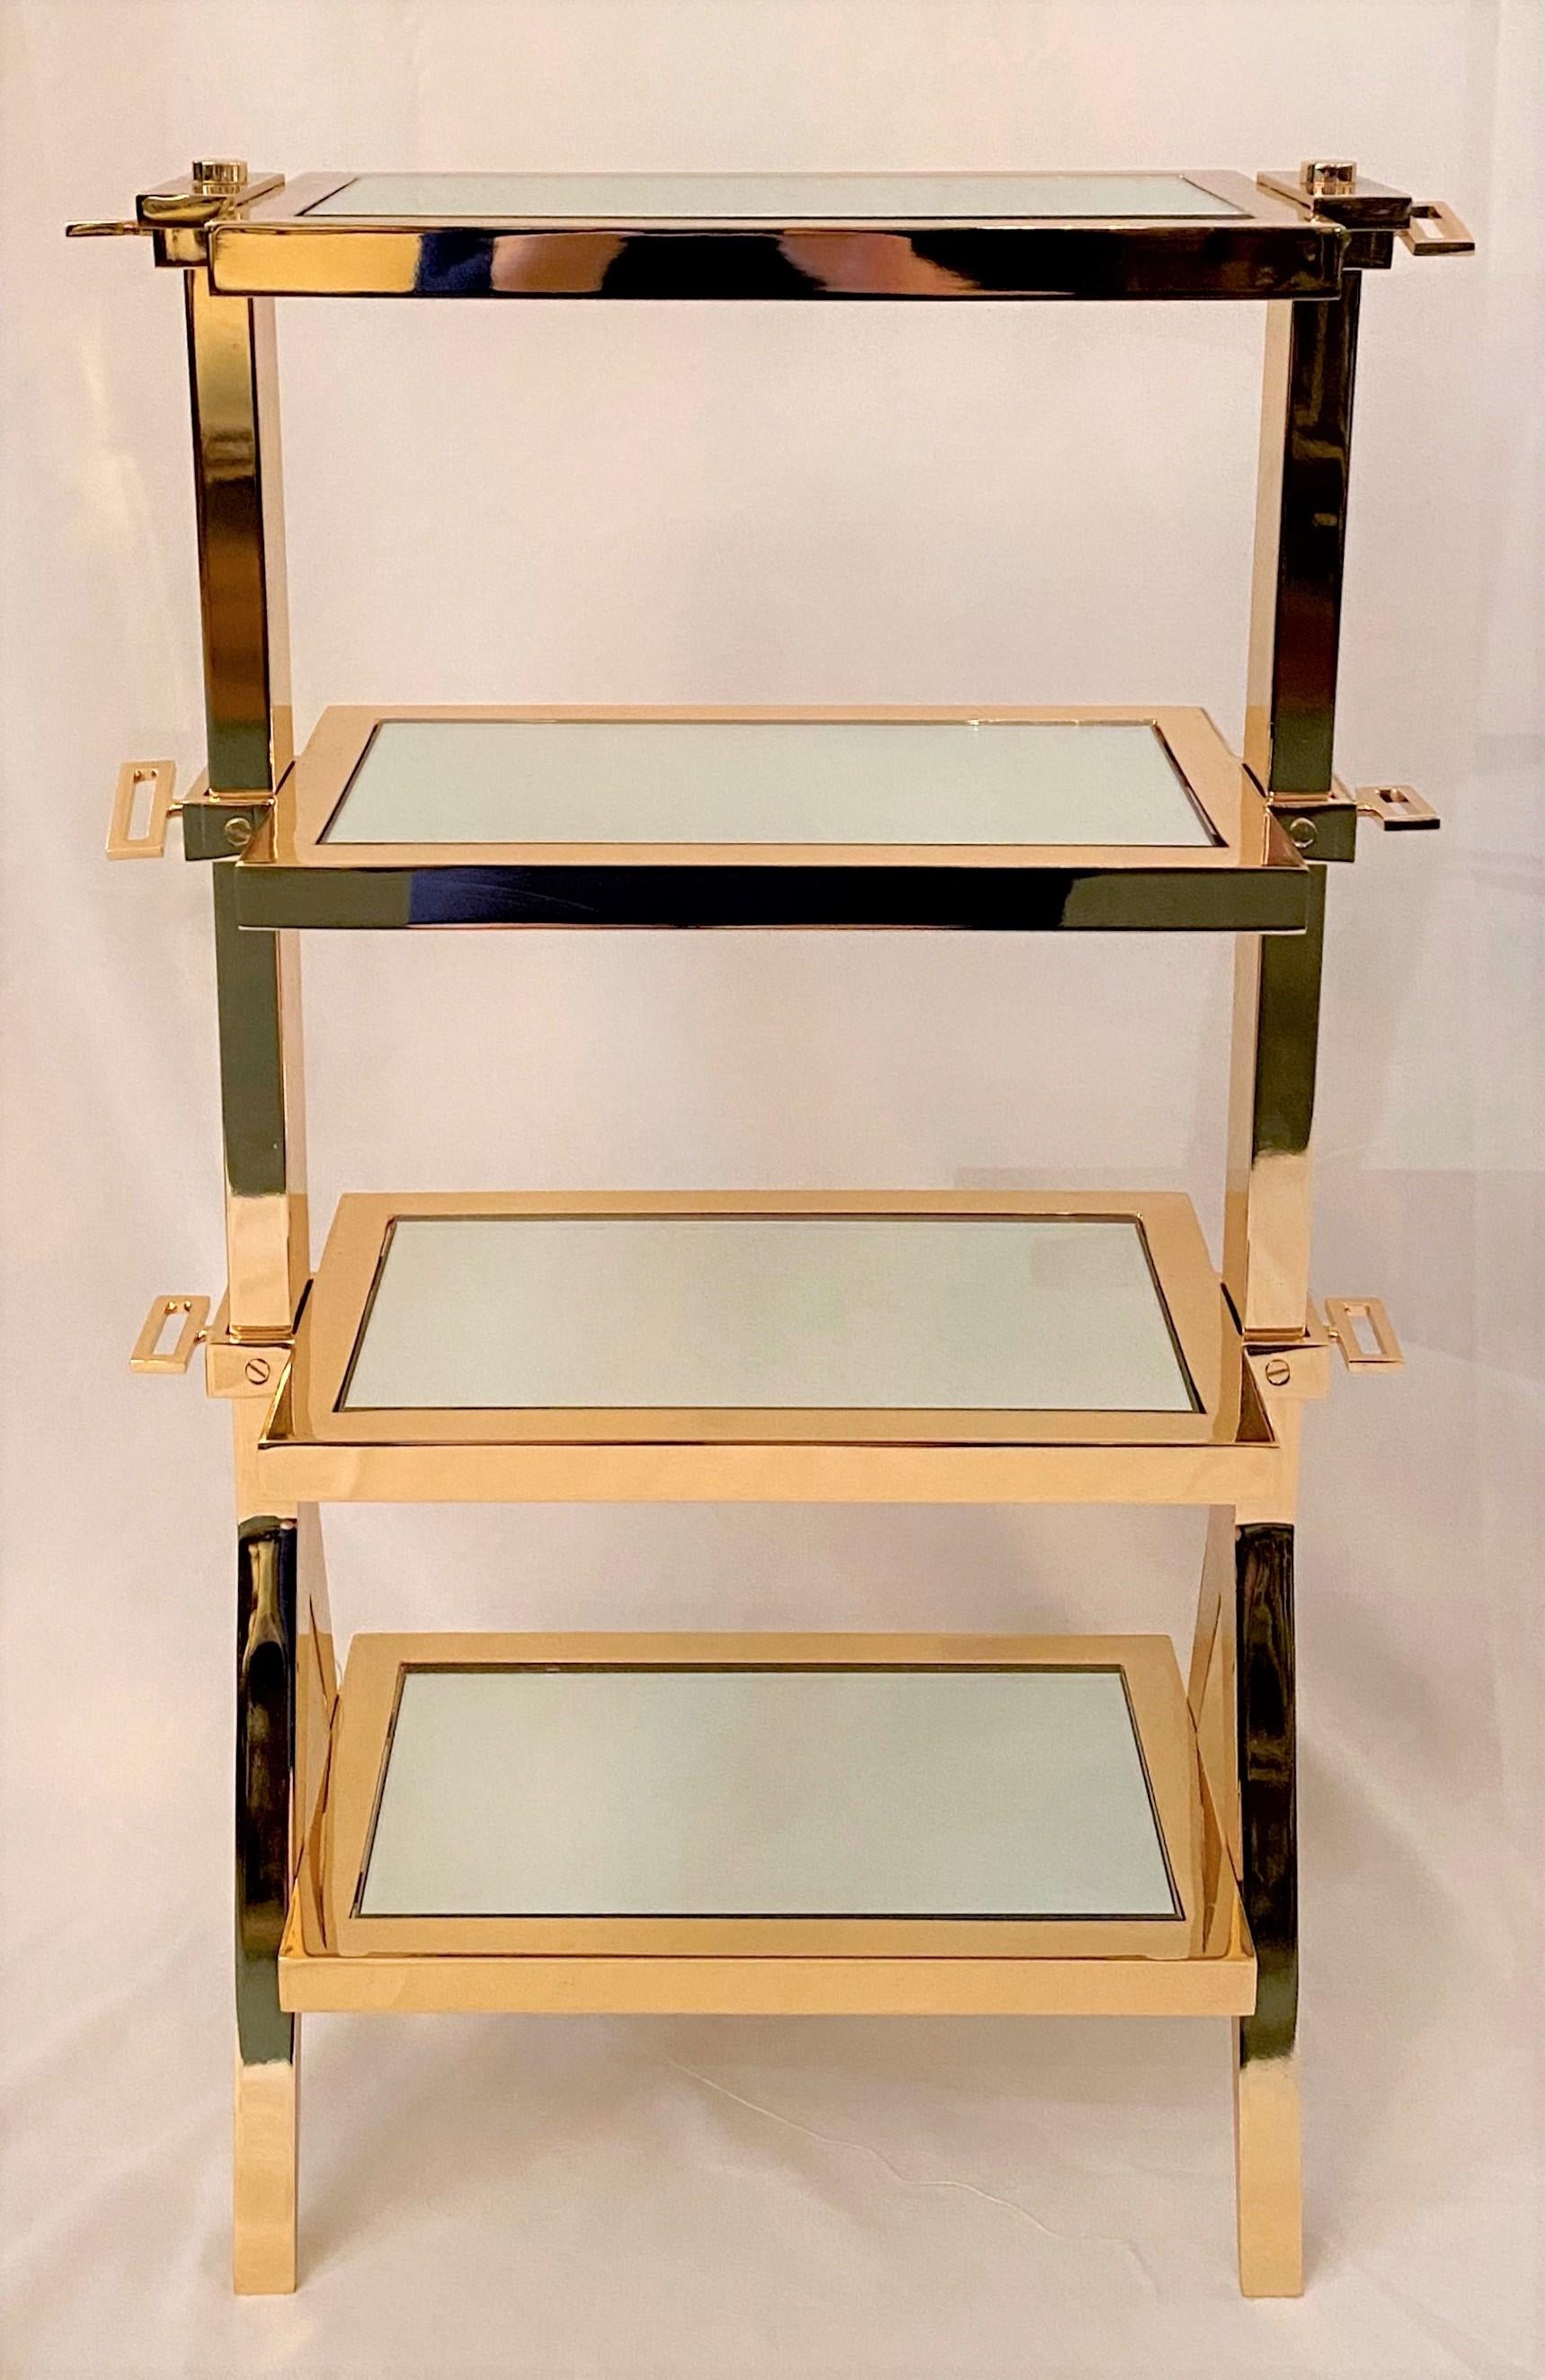 English Pair of Antique Art Deco Gold-Plated and Mirrored End Tables, circa 1940-1950